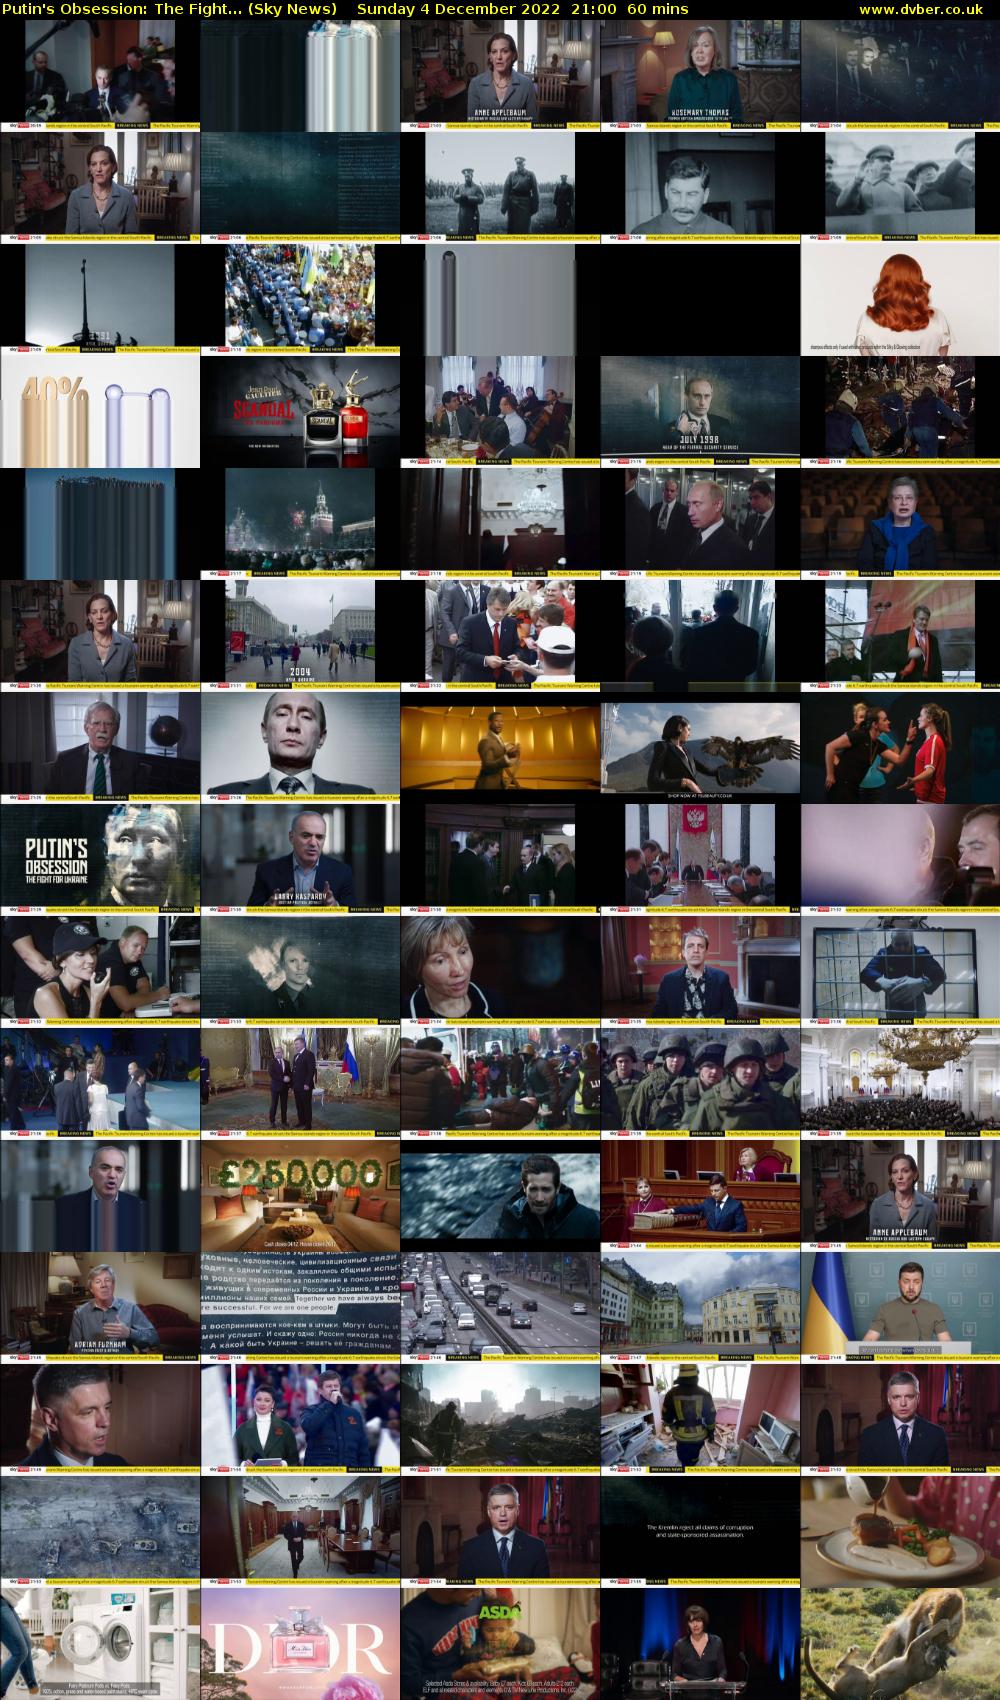 Putin's Obsession: The Fight... (Sky News) Sunday 4 December 2022 21:00 - 22:00